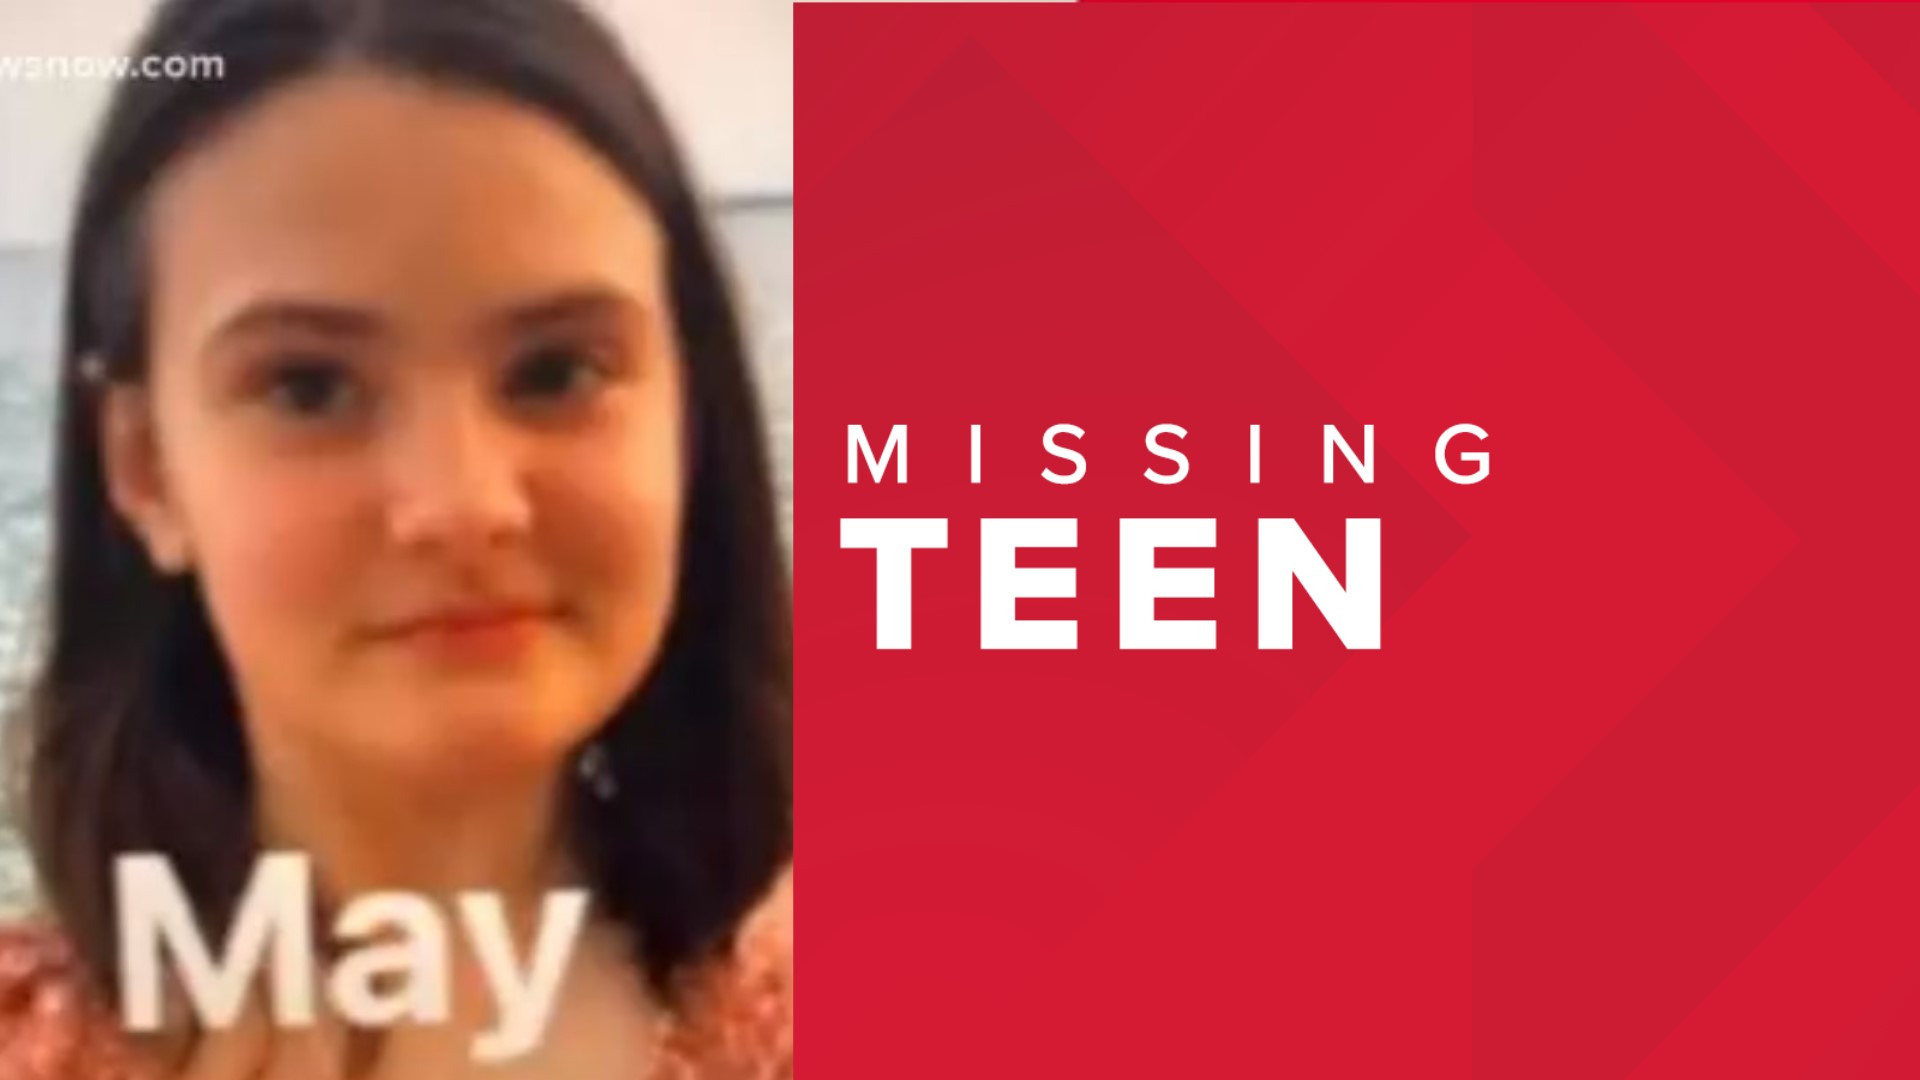 Virginia Beach Police Say Missing 14 Year Old Found Safe